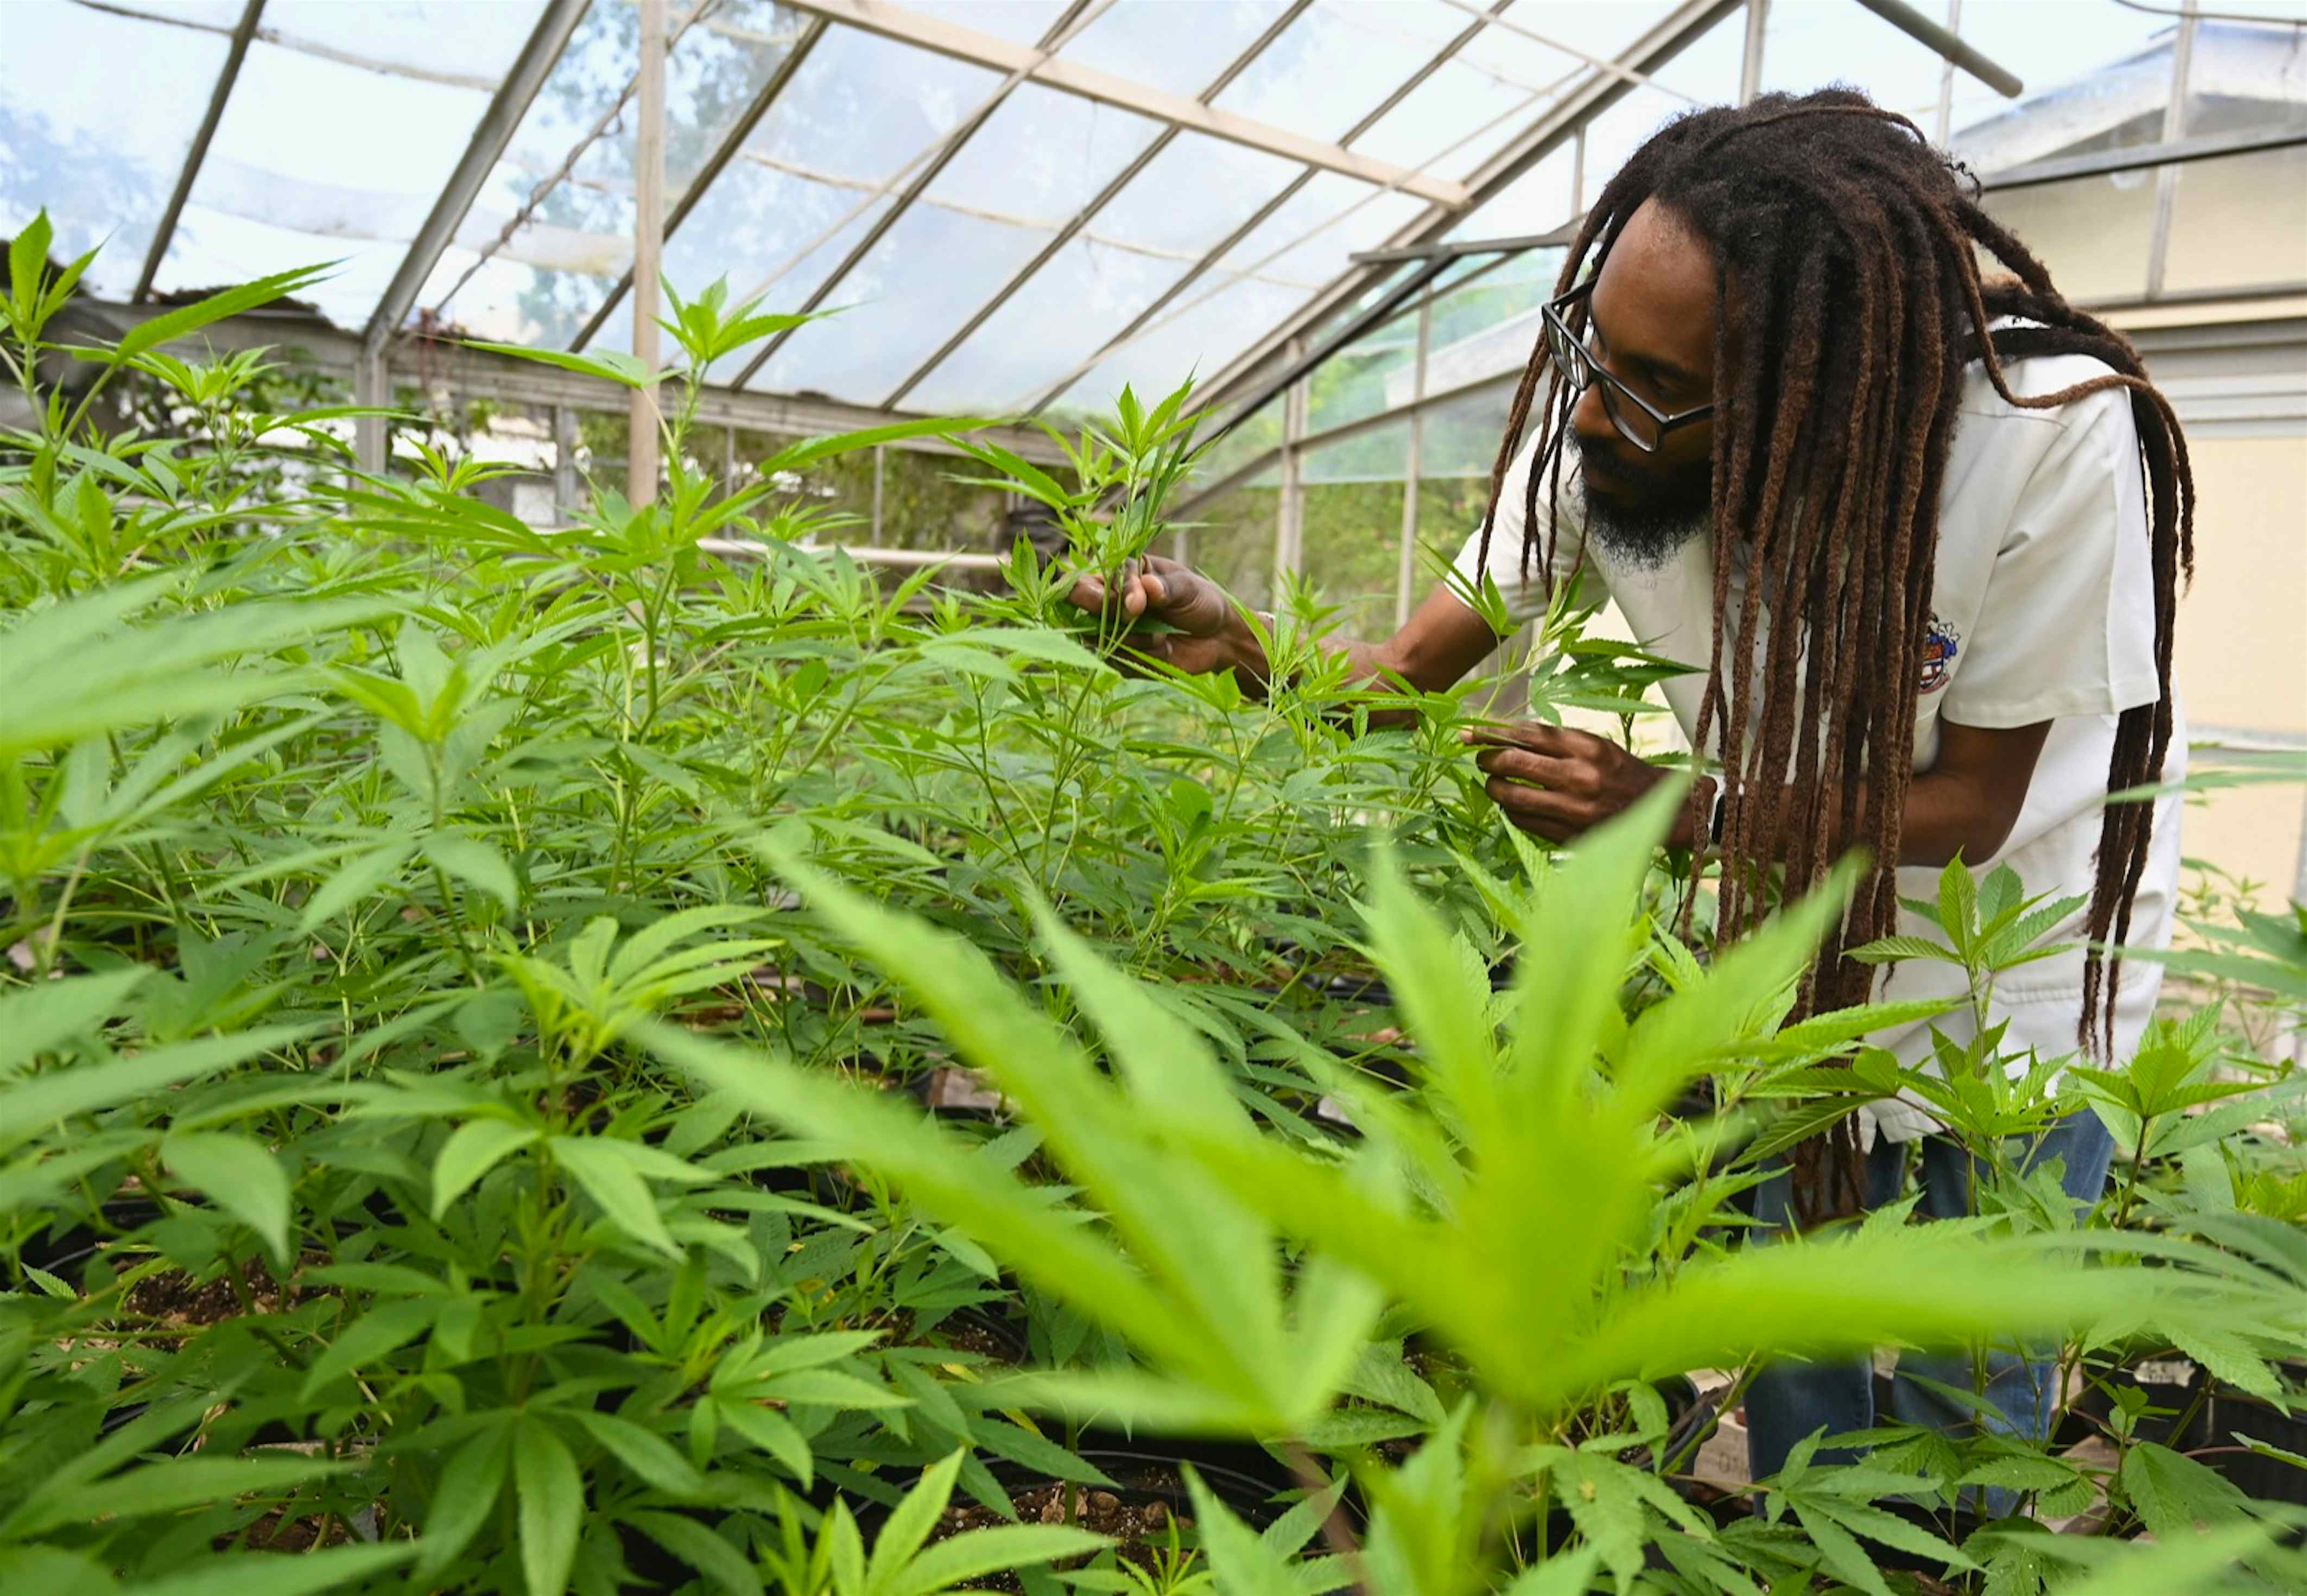 What you need to know about smoking weed legally in Jamaica